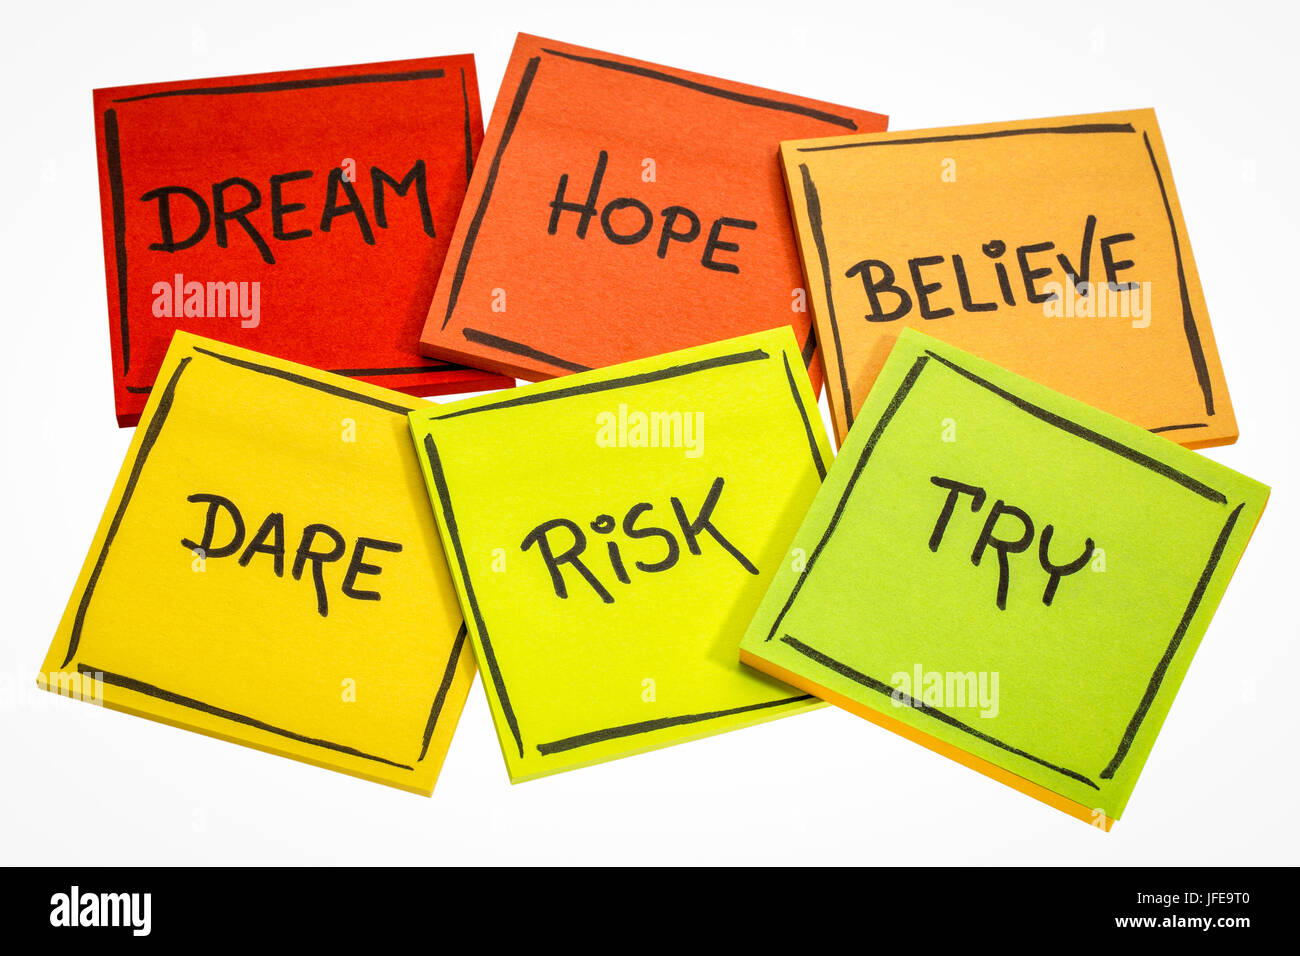 dream, hope, believe, dare, risk, try - motivational concept - a set of isolated sticky notes with handwriting Stock Photo